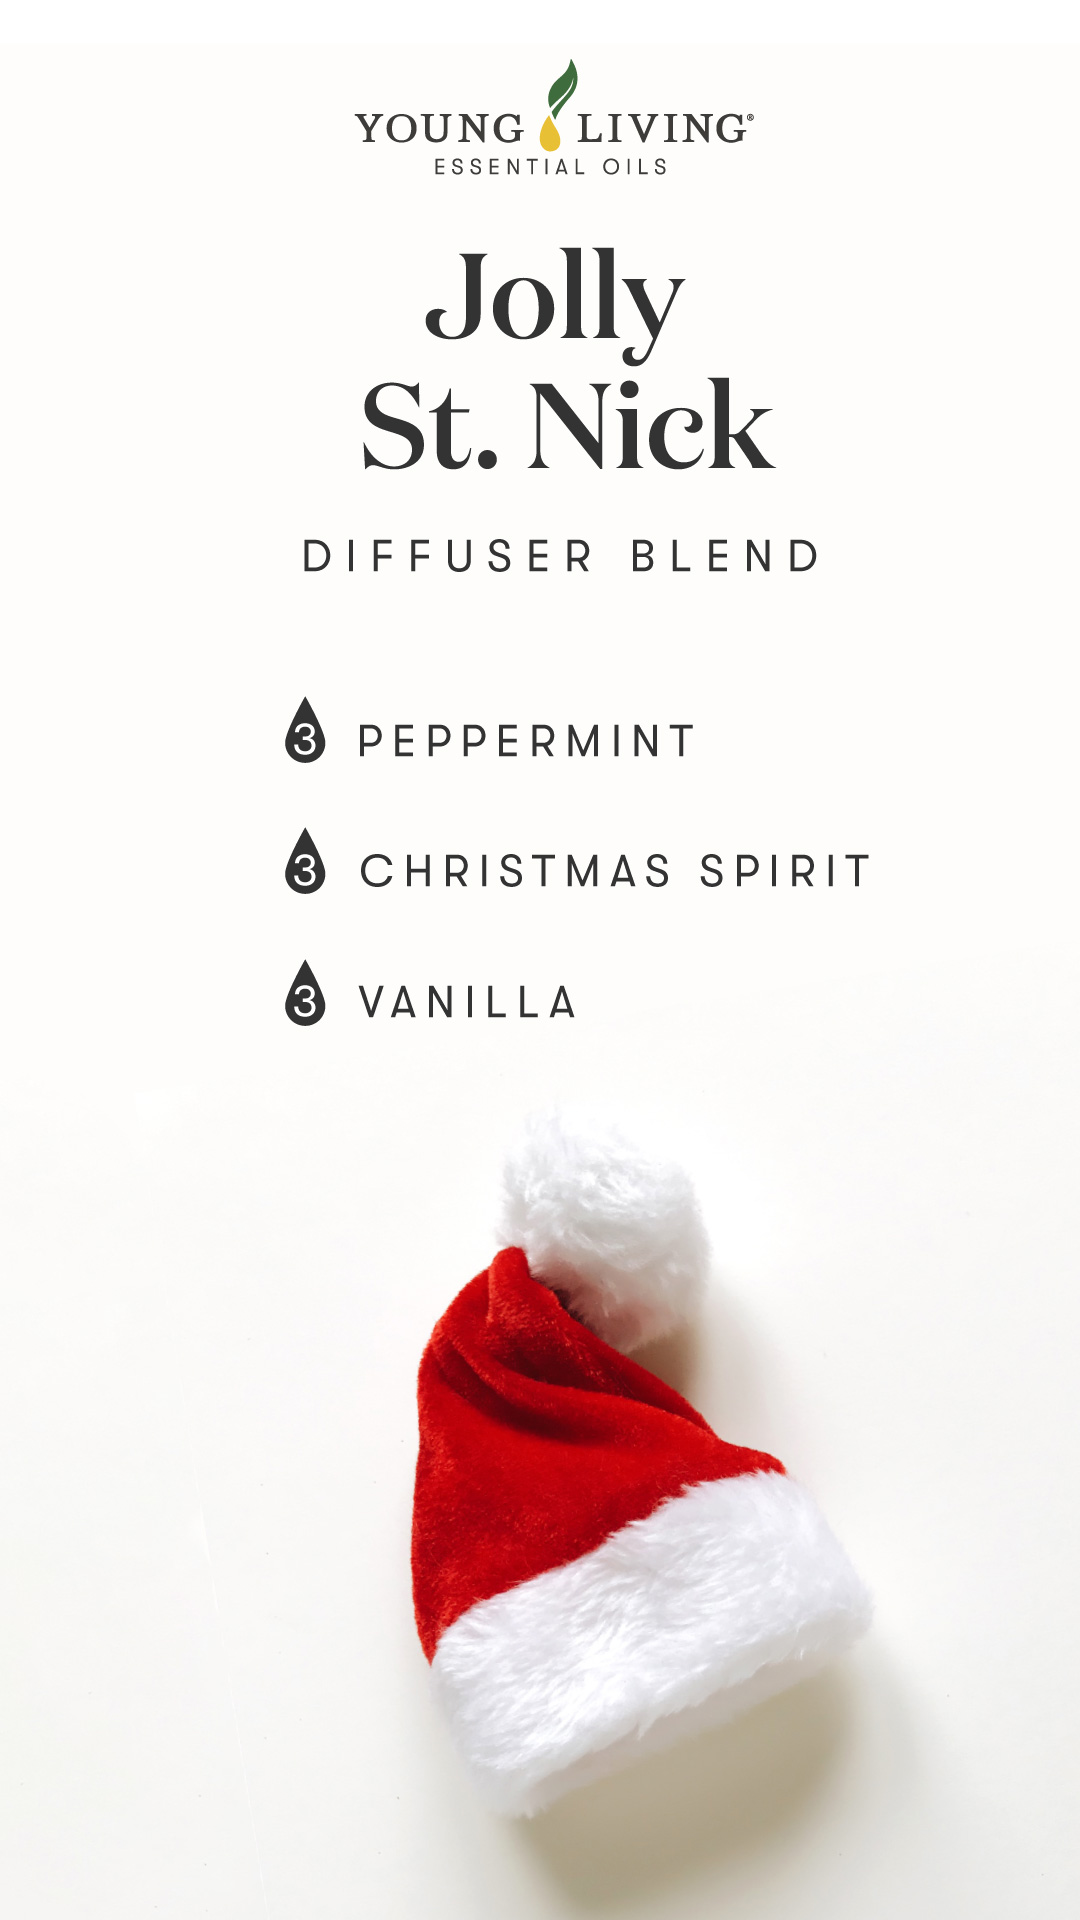 Jolly St. Nick diffuser blend - Young Living Lavender Life Blog 